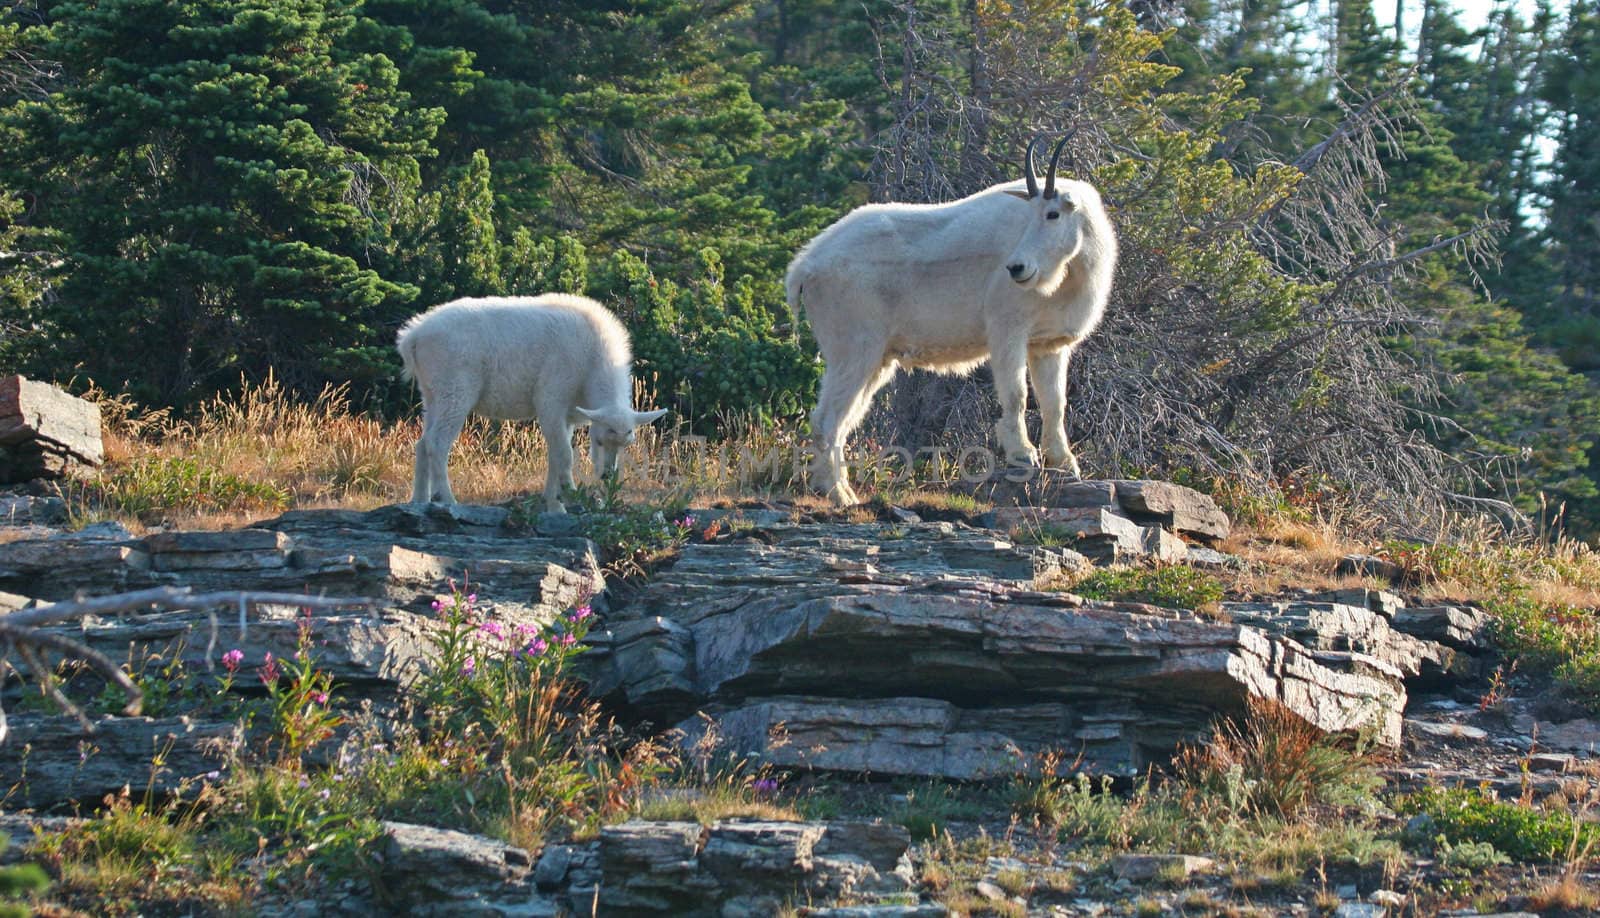 Mountain Goat with Kid by LoonChild